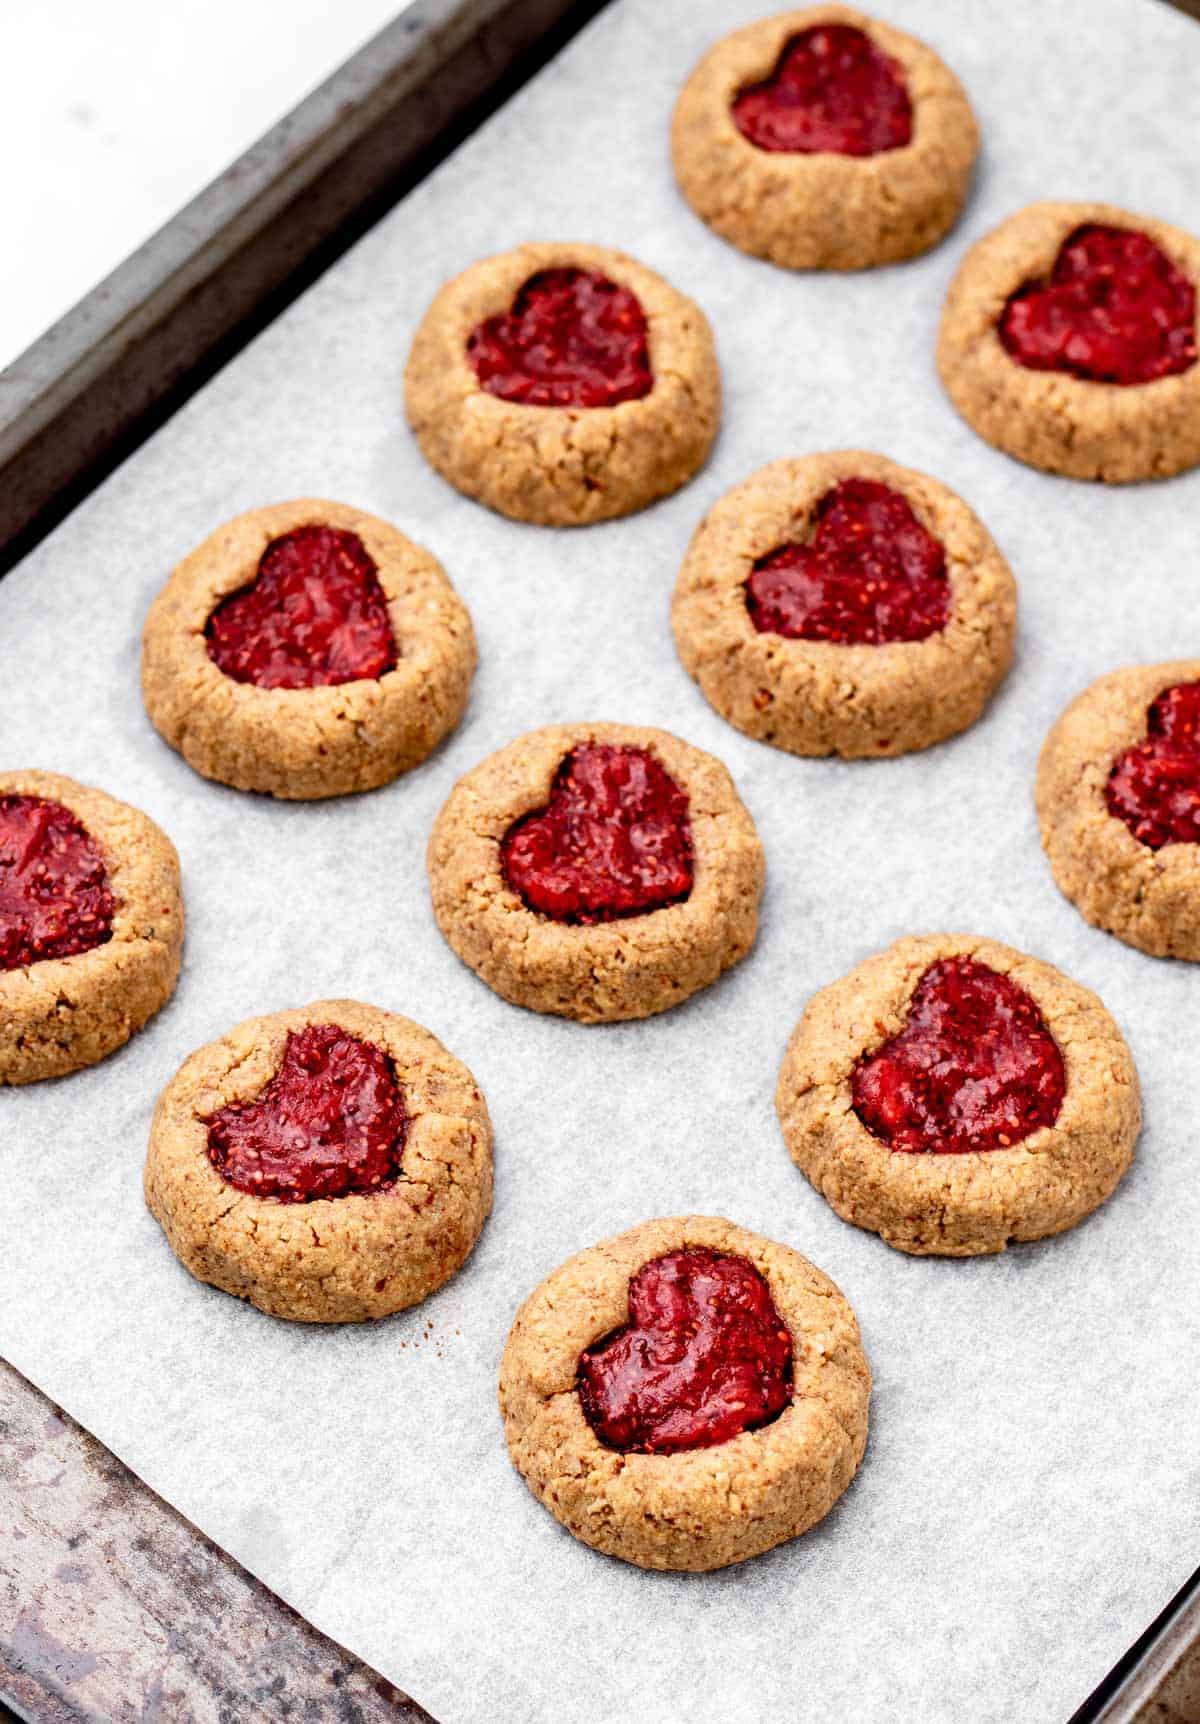 Heart thumbprint cookies on a cooking sheet lined with parchment paper, after coming out of the oven.